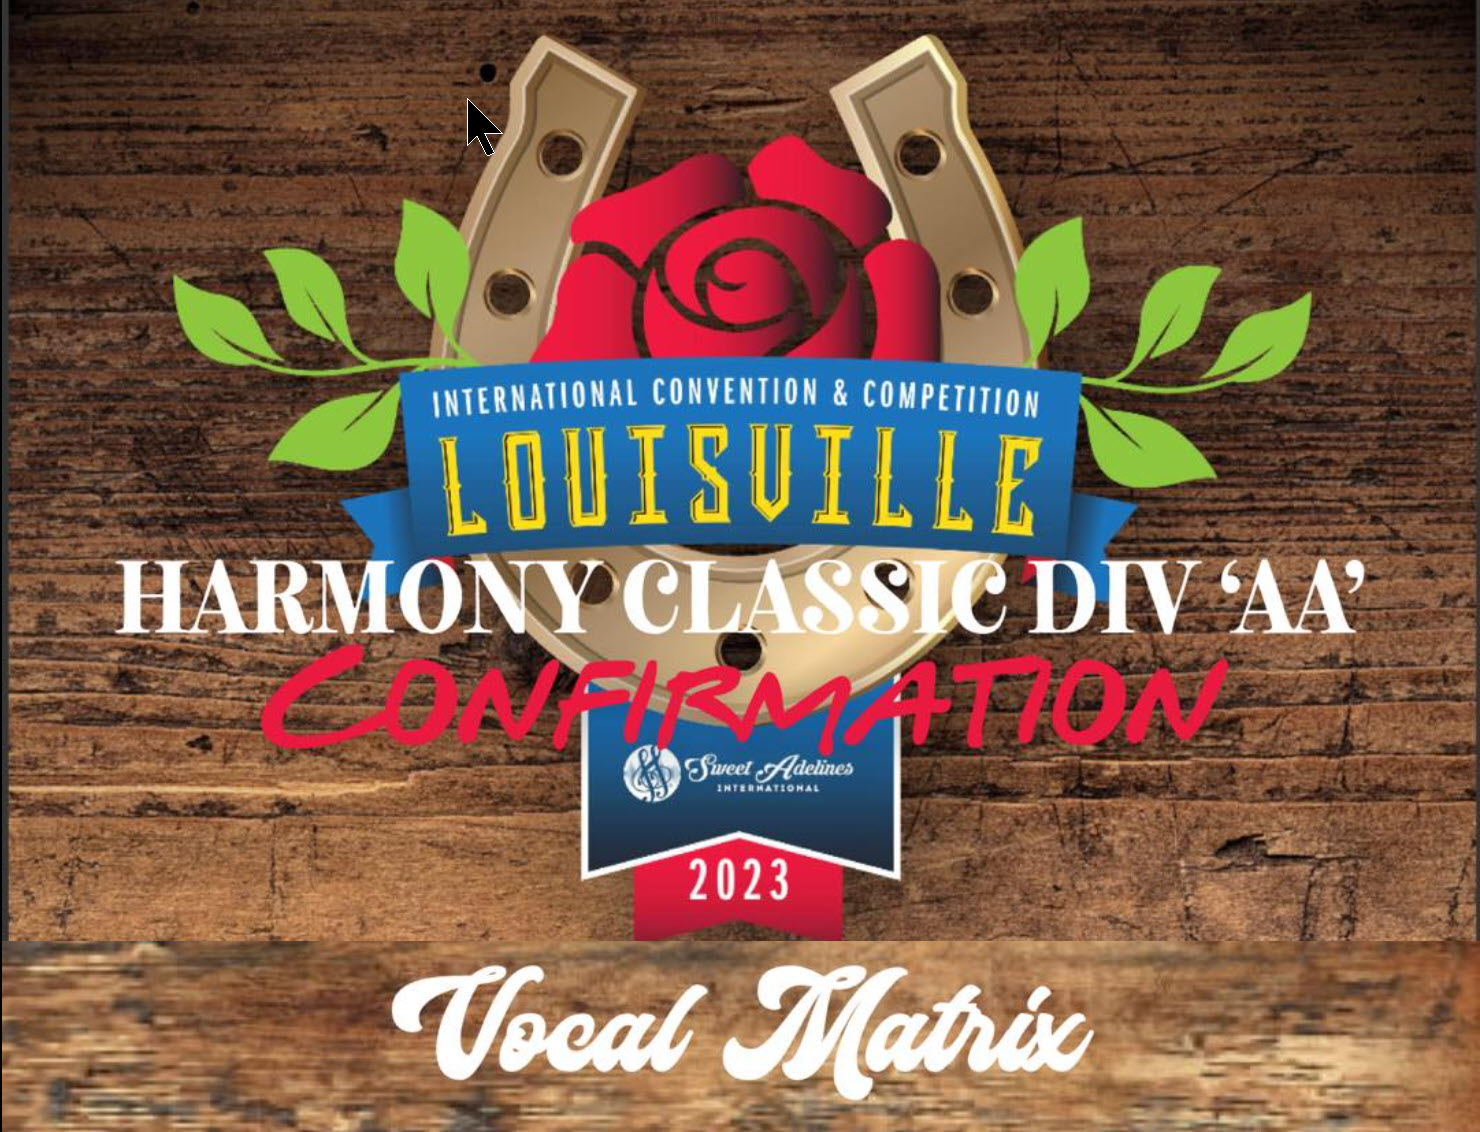 Vocal Matrix invited to compete in the Harmony Classic Div AA in 2023